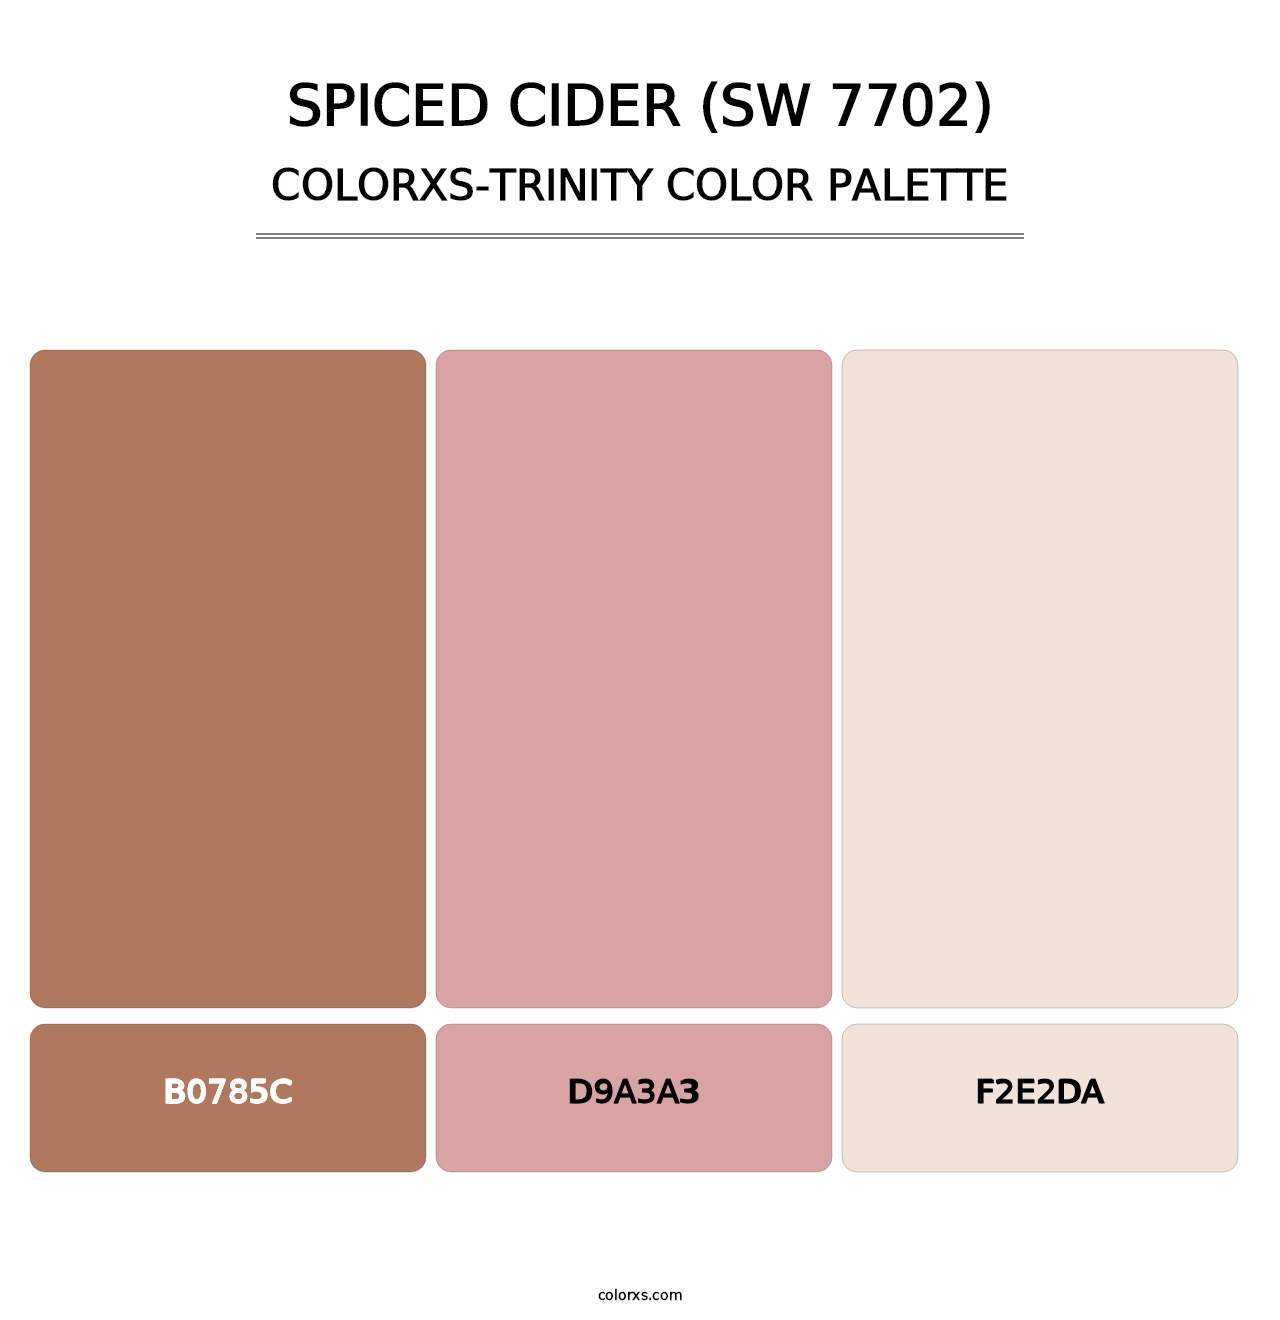 Spiced Cider (SW 7702) - Colorxs Trinity Palette